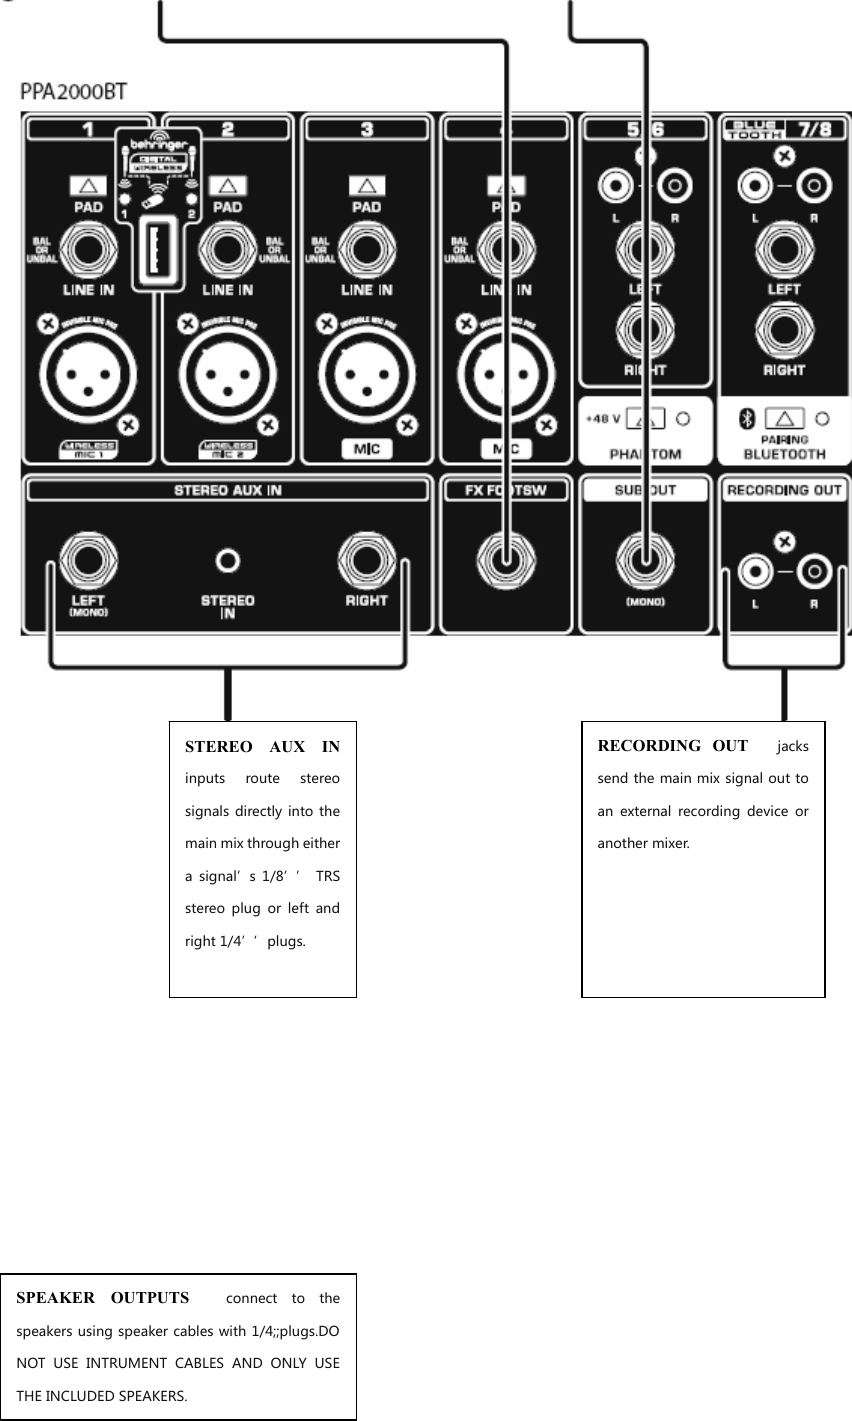 STEREO  AUX  INinputs  route  stereosignals  directly into  themain mix through either a  signal’s 1/8’’ TRSstereo  plug or  left andright 1/4’’plugs.RECORDING  OUT    jackssend the main mix signal out to an  external  recording  device  or another mixer.SPEAKER  OUTPUTS  connect  to thespeakers using speaker cables with 1/4;;plugs.DONOT  USE  INTRUMENT  CABLES AND ONLY USE THE INCLUDED SPEAKERS.